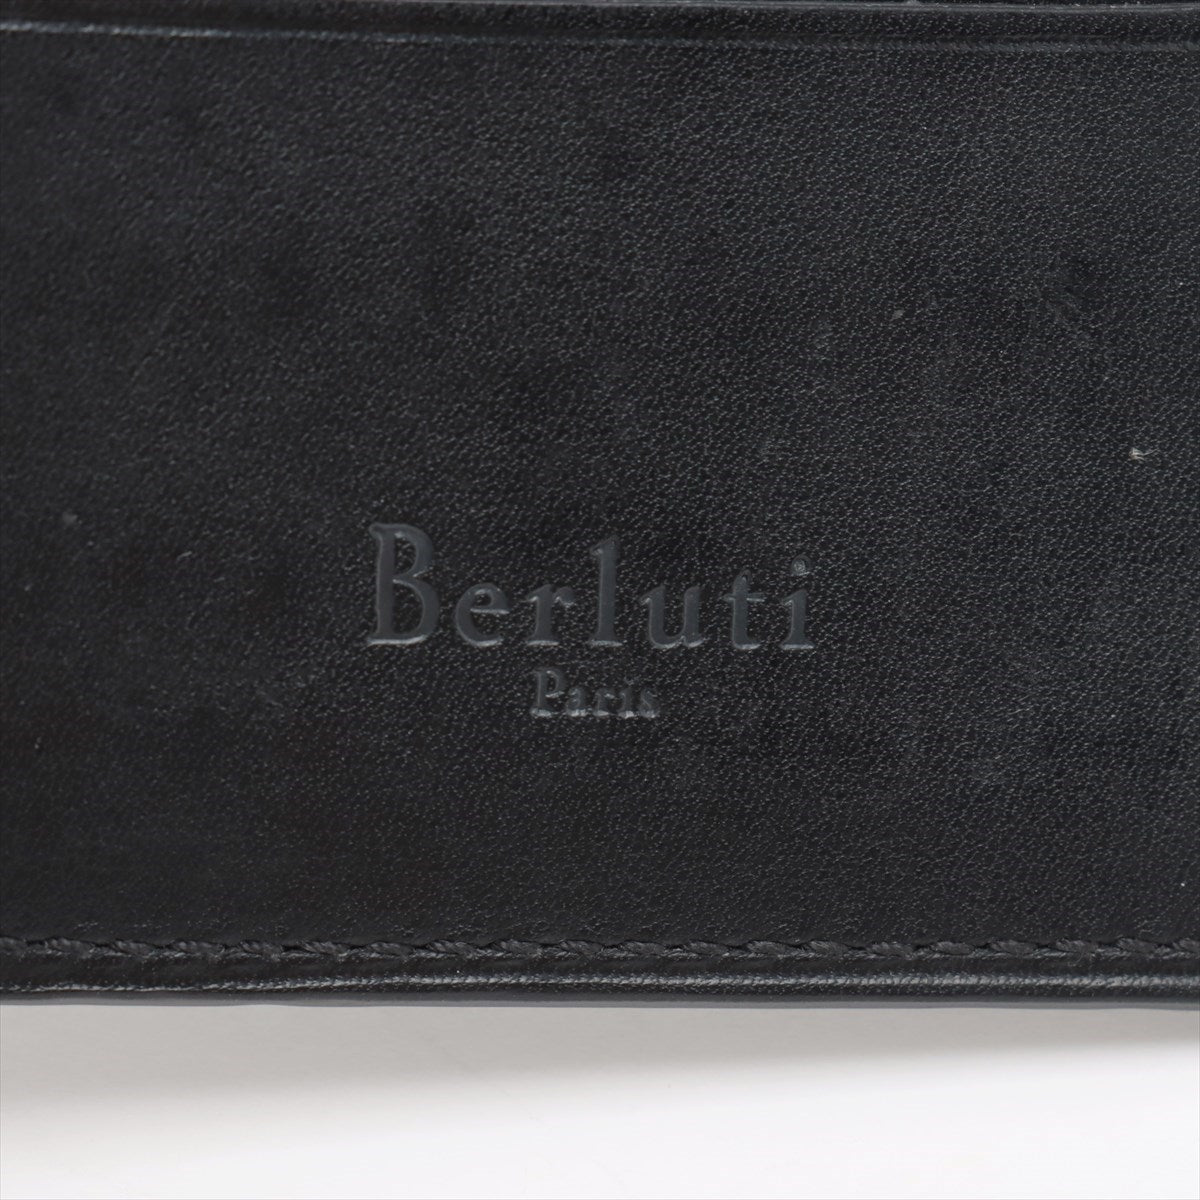 Belotti Leather Compact Wallet Navy Lappeenranta Cell Price Tickets